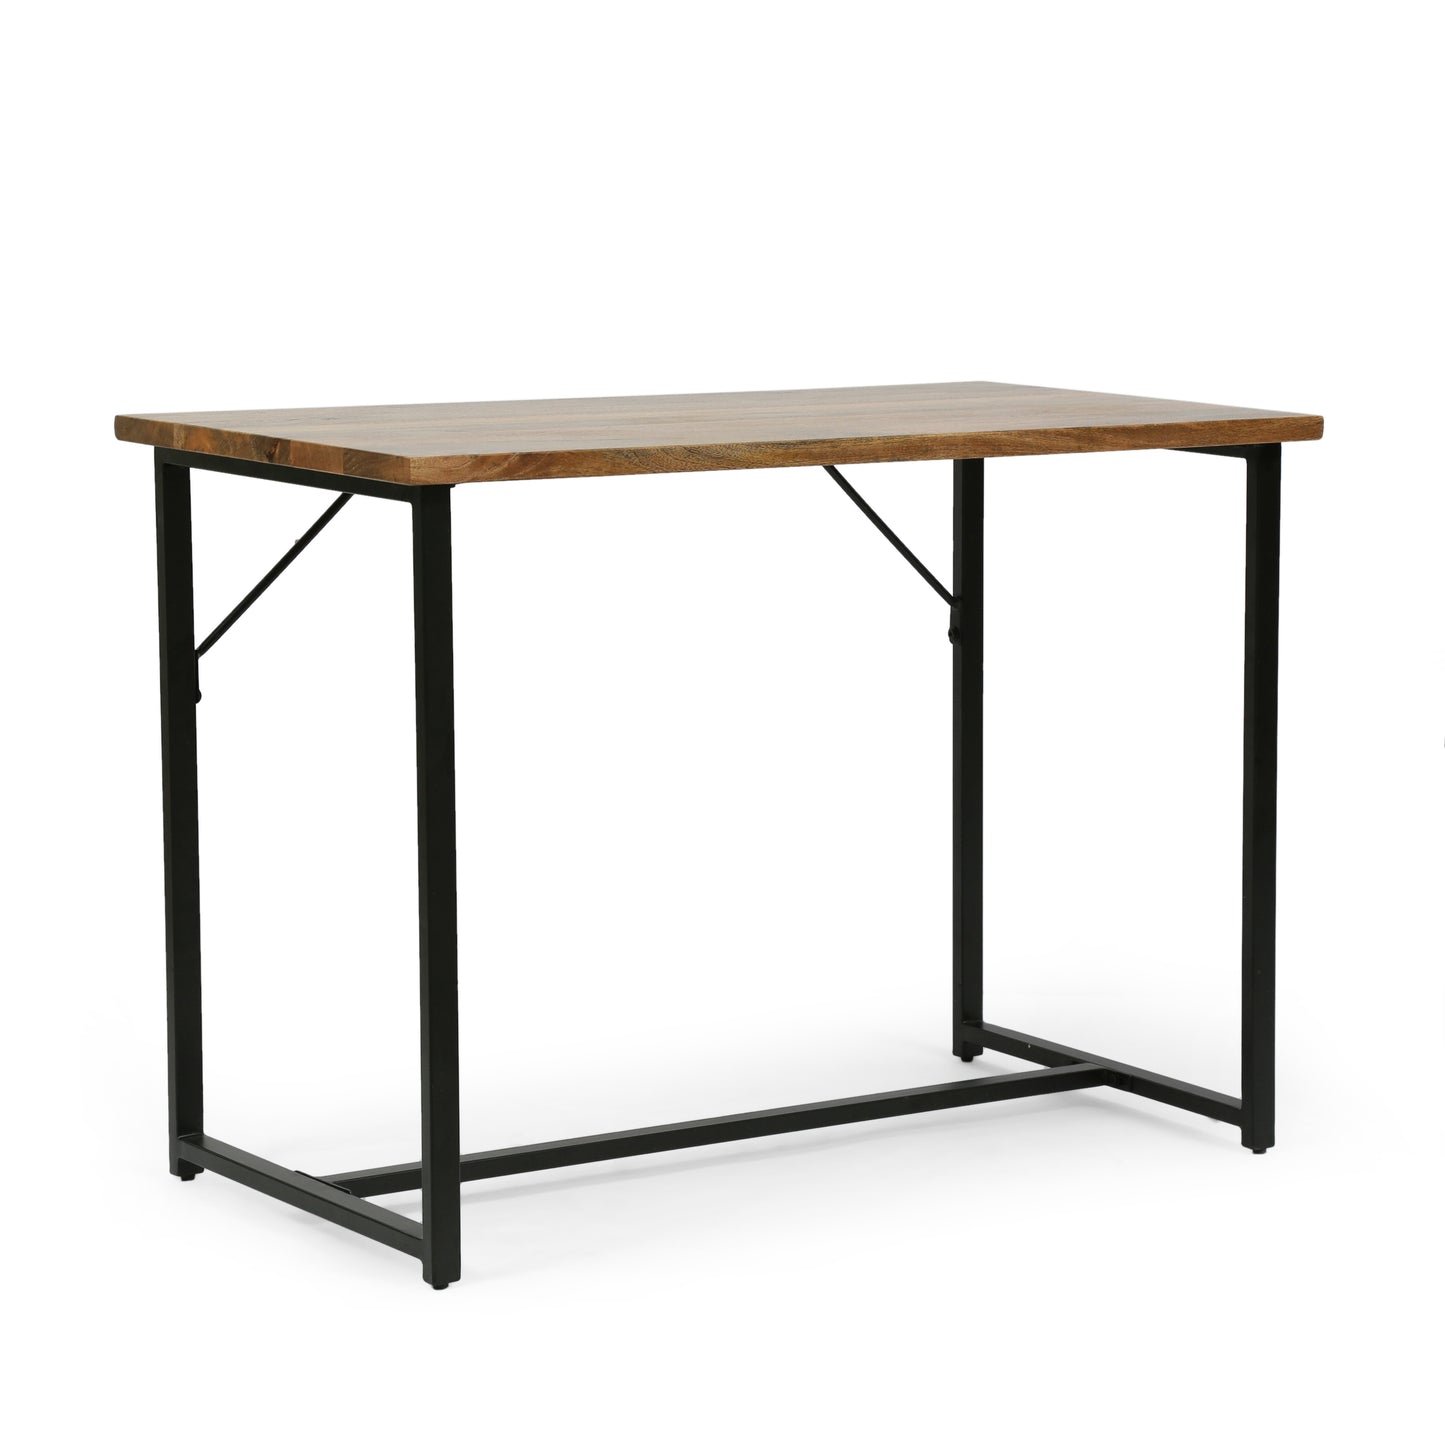 Addyston Modern Industrial Handmade Mango Wood Console Table, Honey Brown and Black